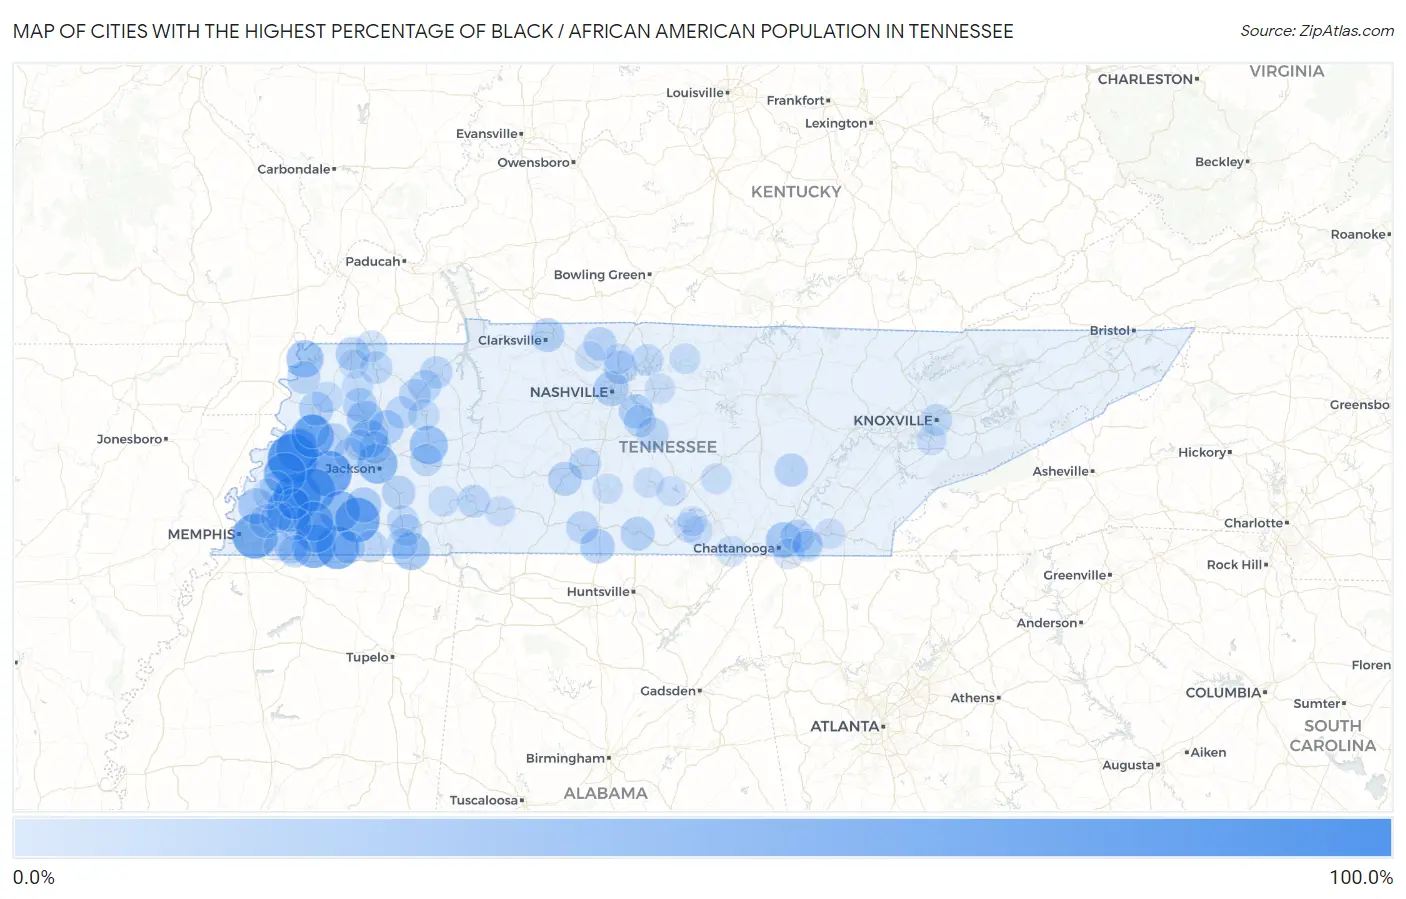 Percentage of Black / African American Population in Tennessee by City